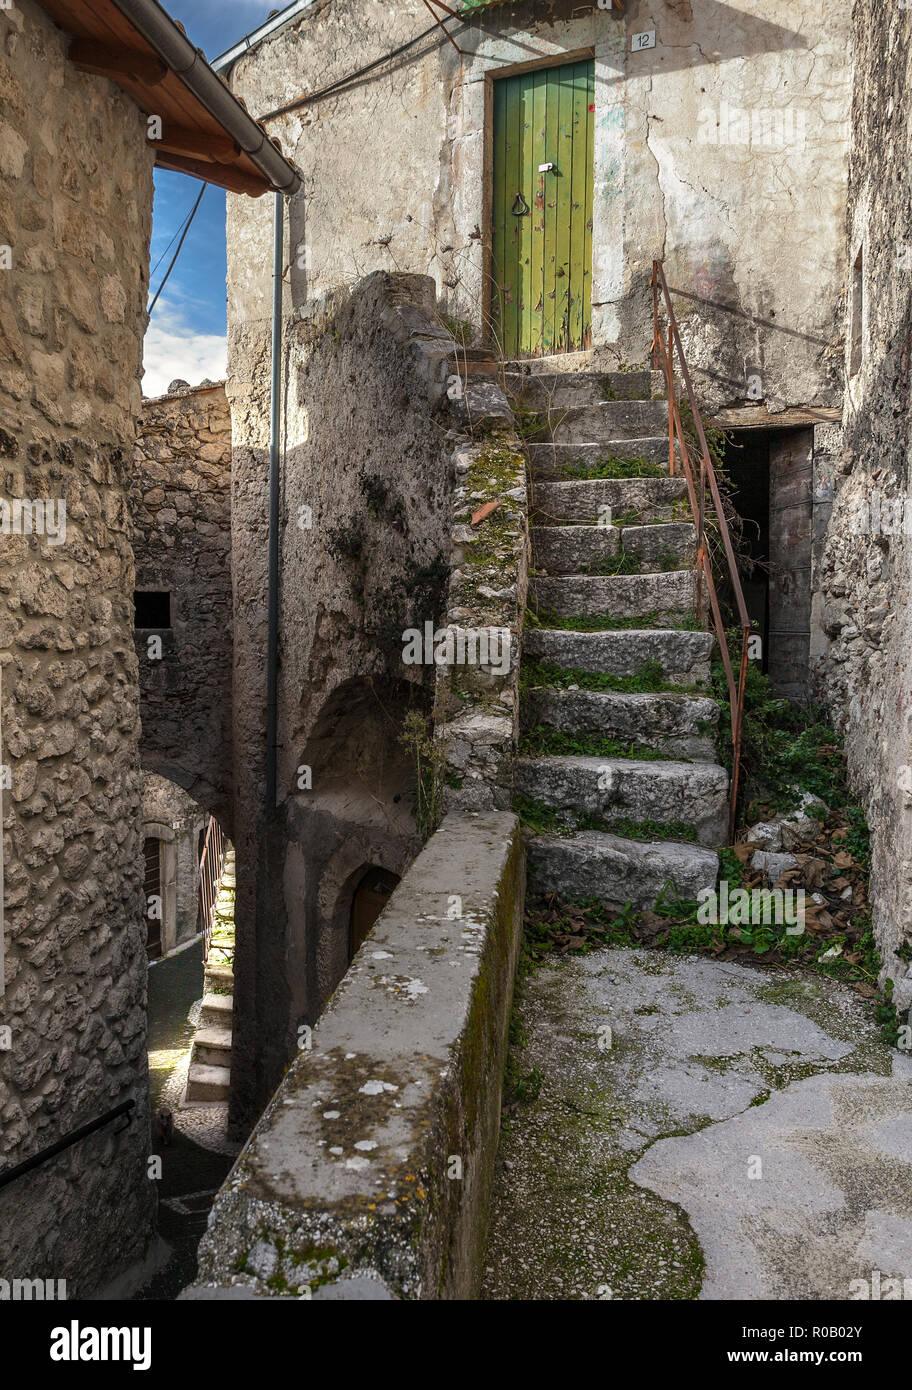 Narrow alley between old stone houses, Roccacasale Abruzzo Stock Photo